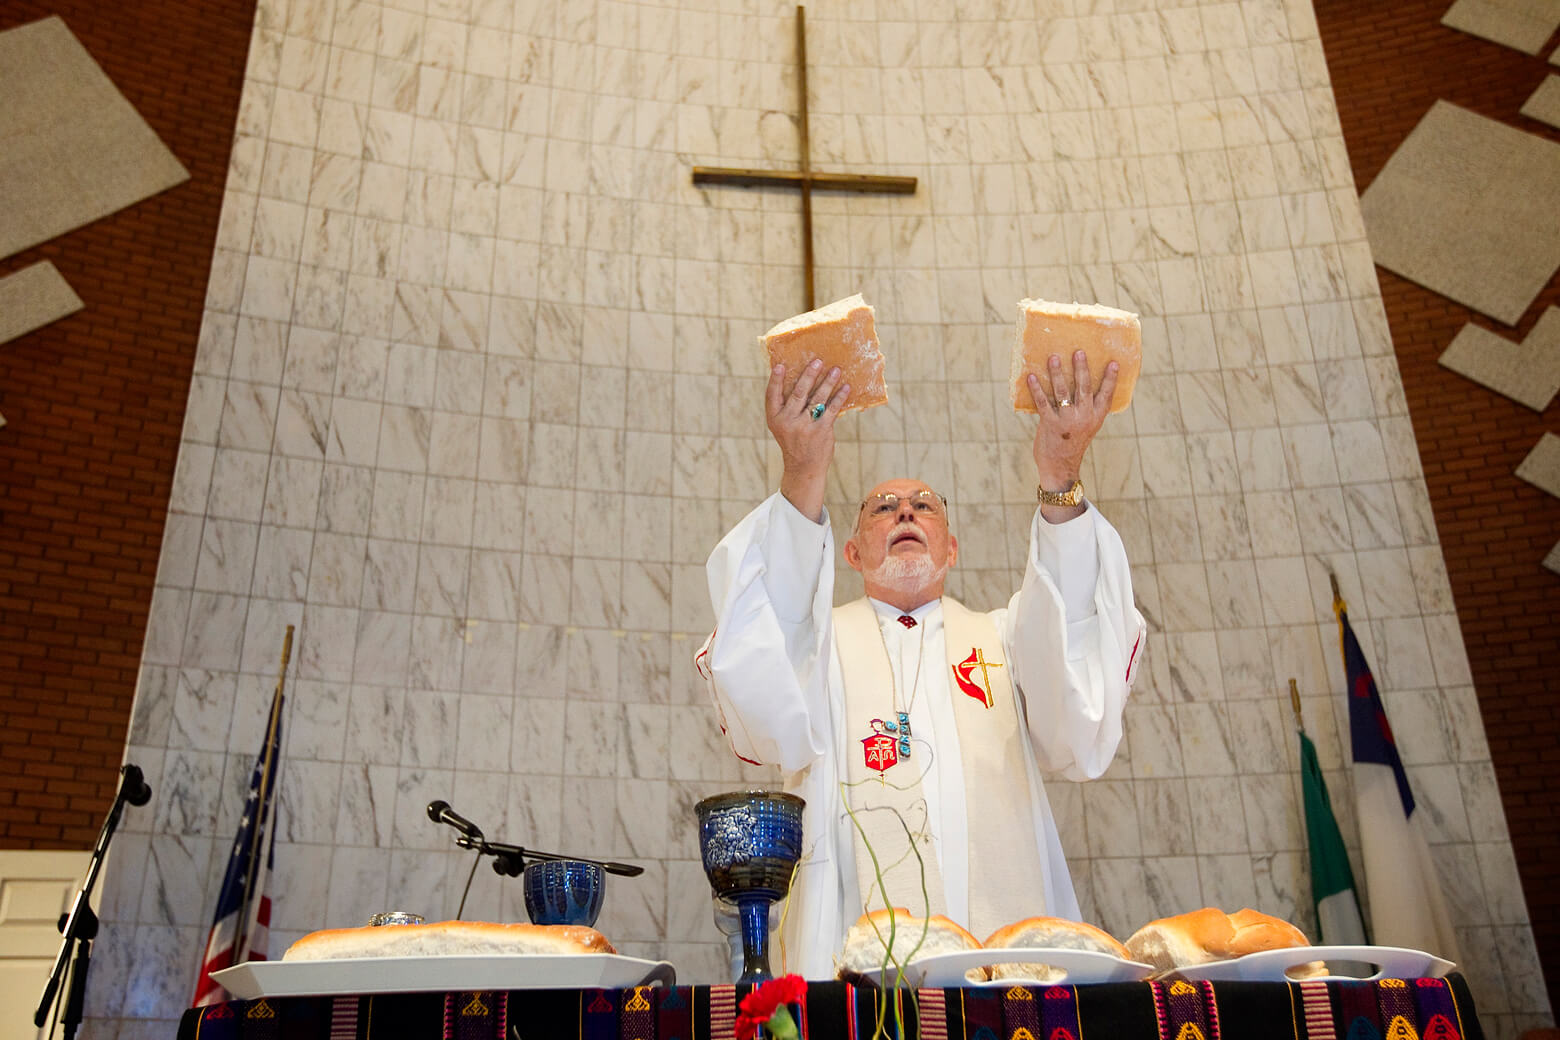 Bishop Joel N. Martinez blesses the elements of Holy Communion during opening worship at the 2011 MARCHA meeting at the Lydia Patterson Institute in El Paso, Texas. File photo by Mike DuBose, UMNS.